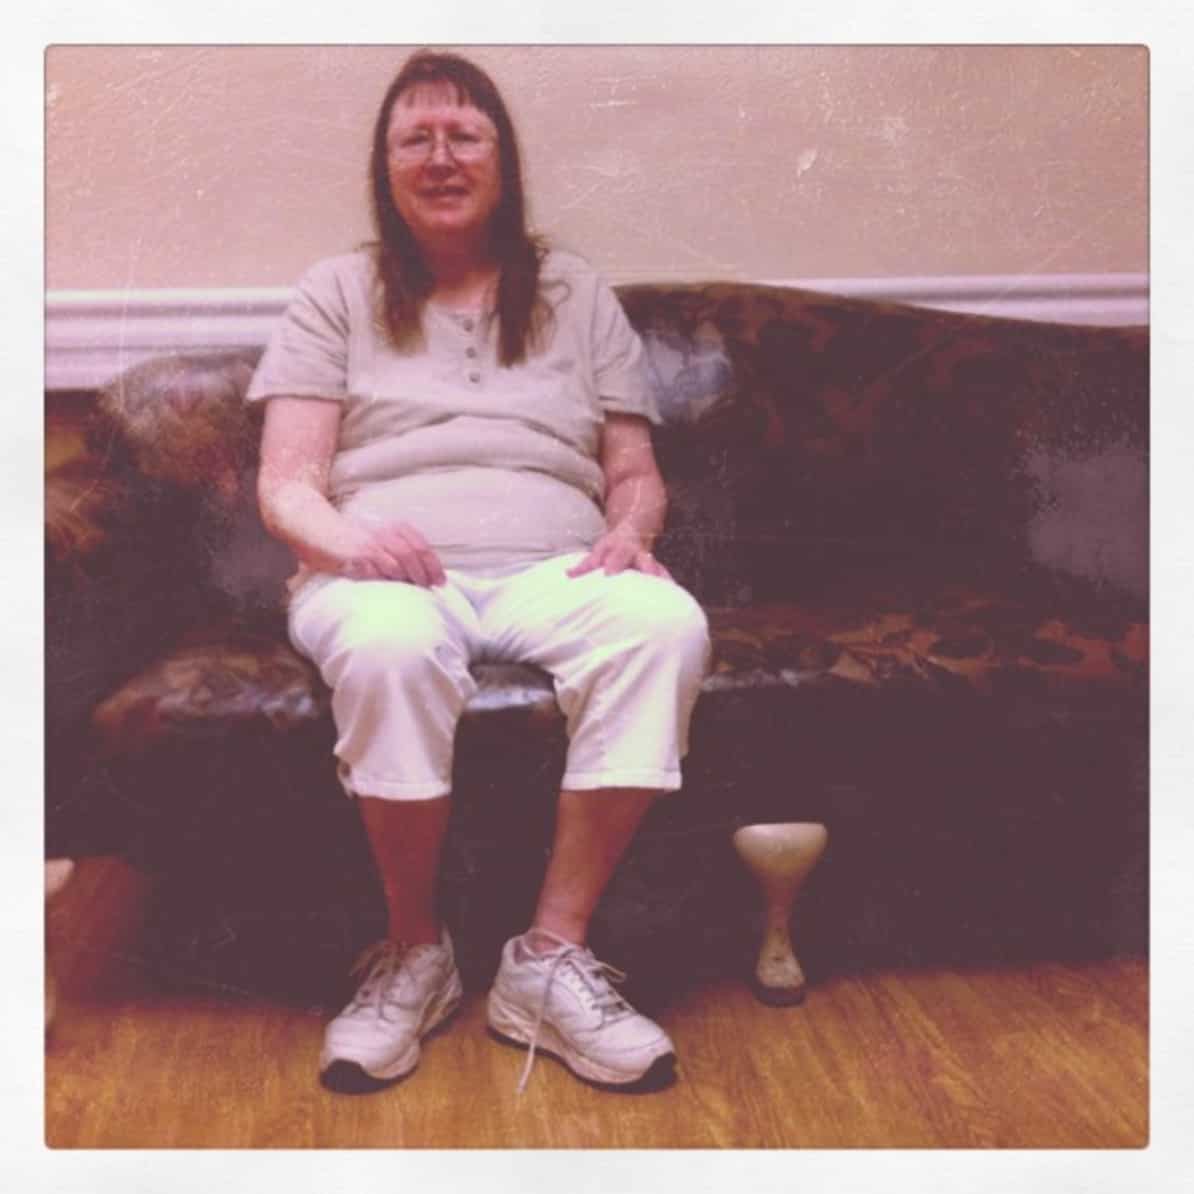 [Photo: Mom in the memory care unit at Happy Acres